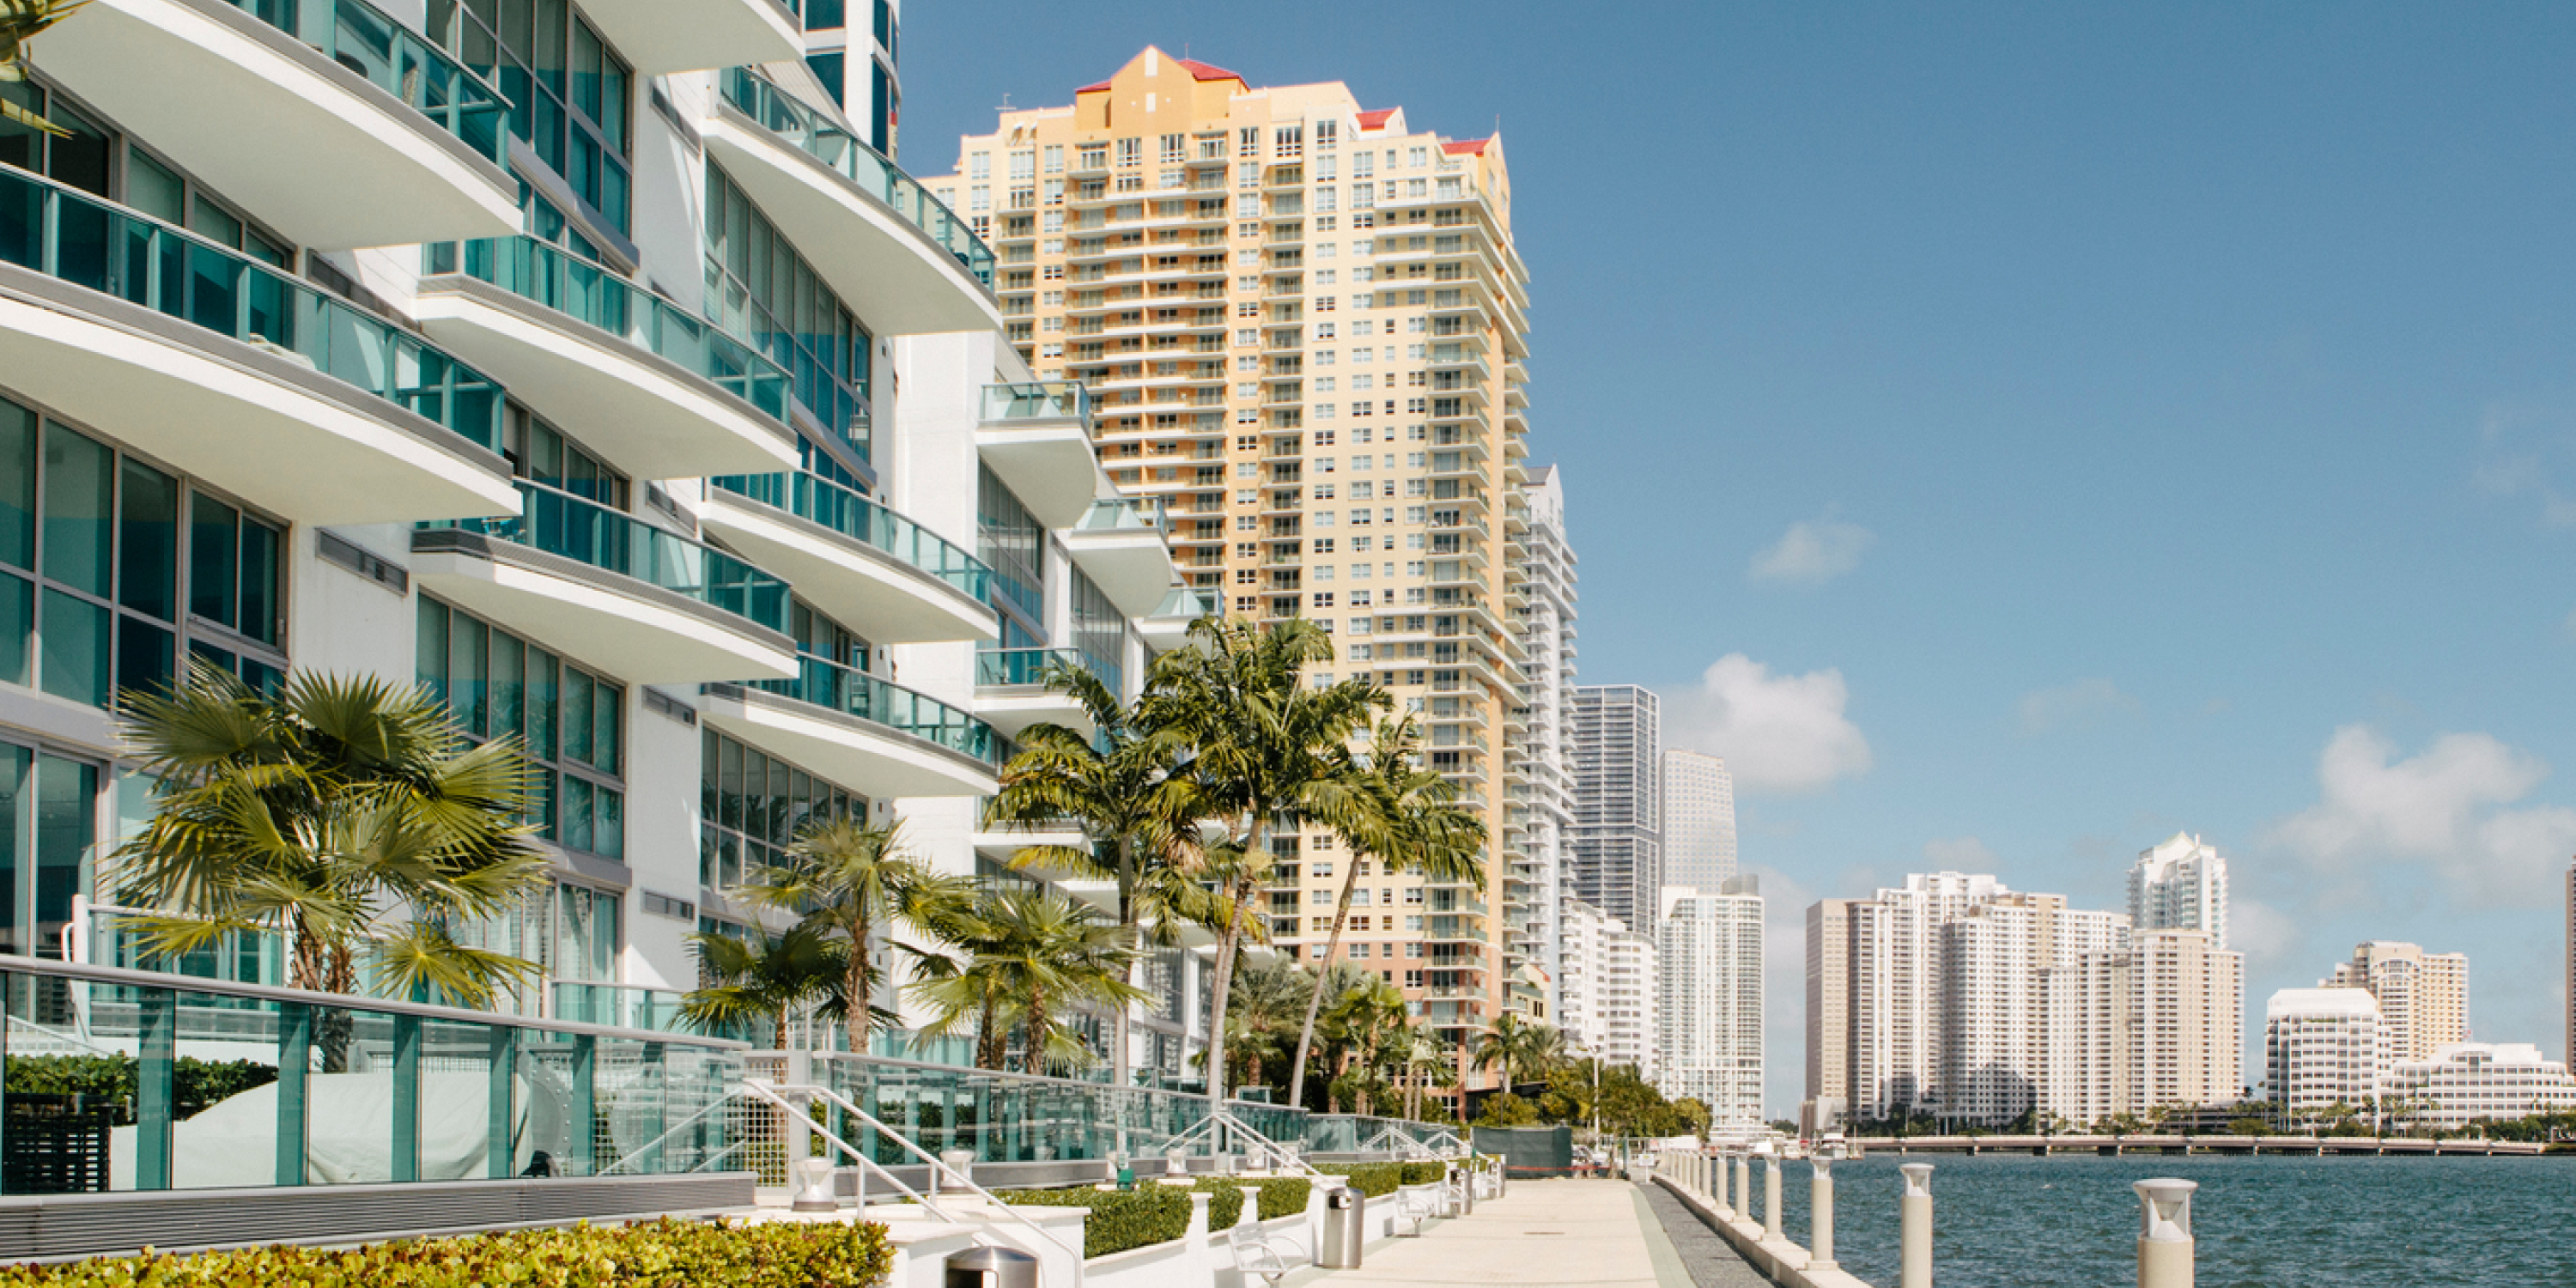 A photo of apartment buildings in Miami near the beach